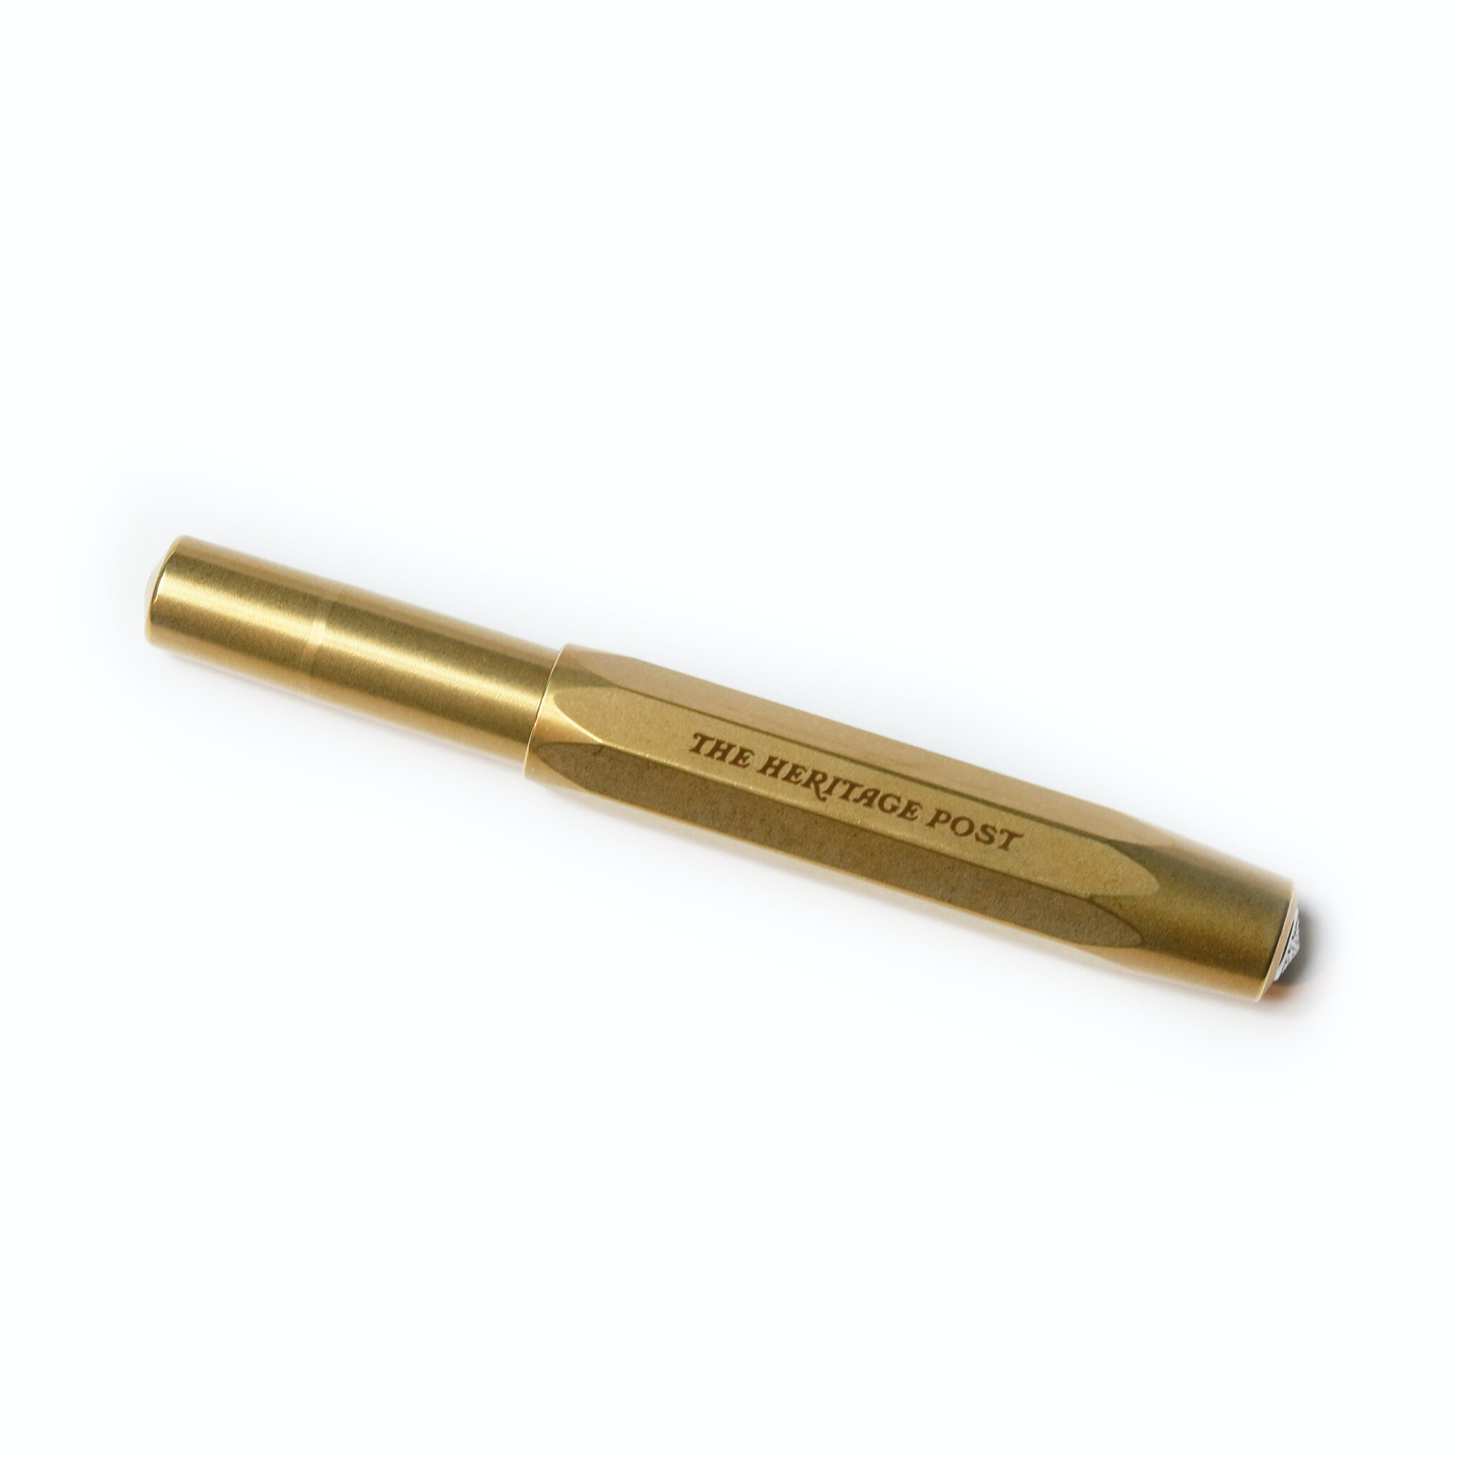 http://theheritagepost.com/cdn/shop/products/the_heritage_post_kaweco_fuellhalter_8.png?v=1661331230